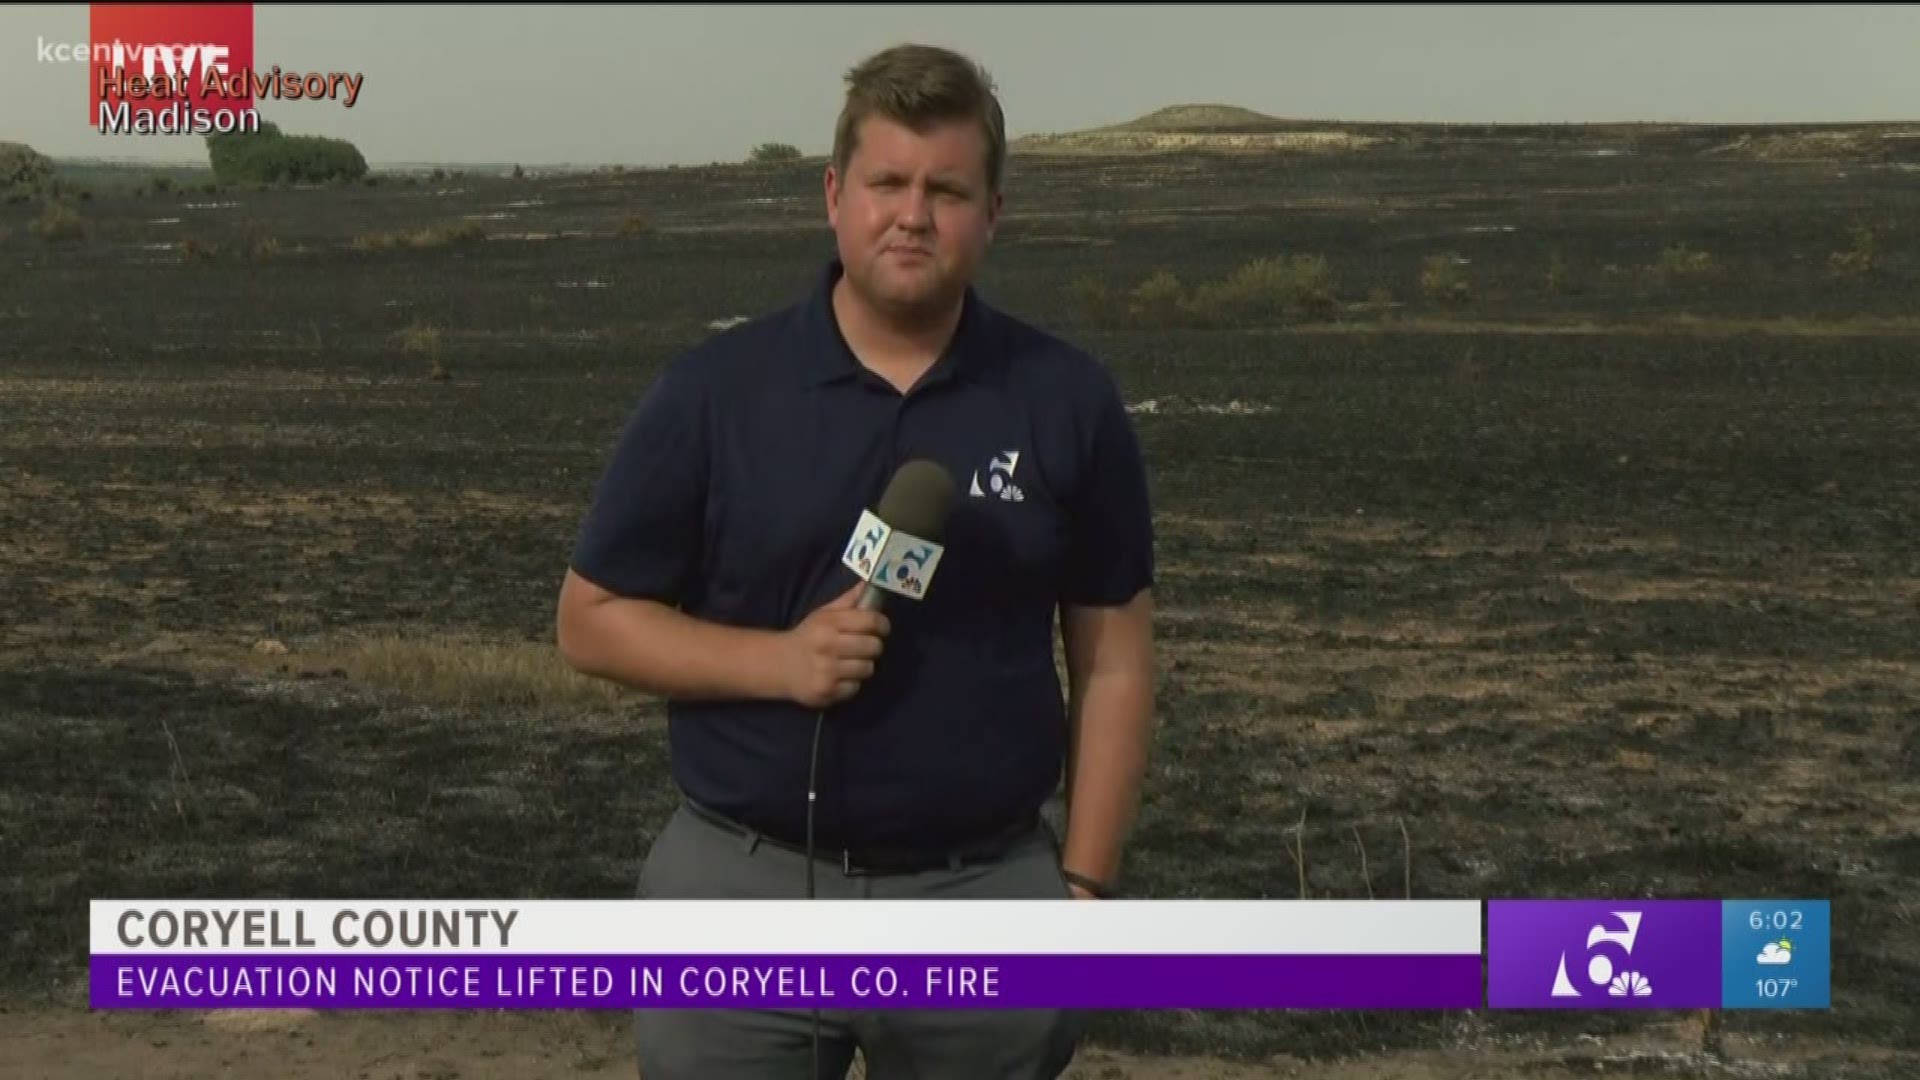 Coryell County residents are back in their homes as the fire's forward progress has stopped.